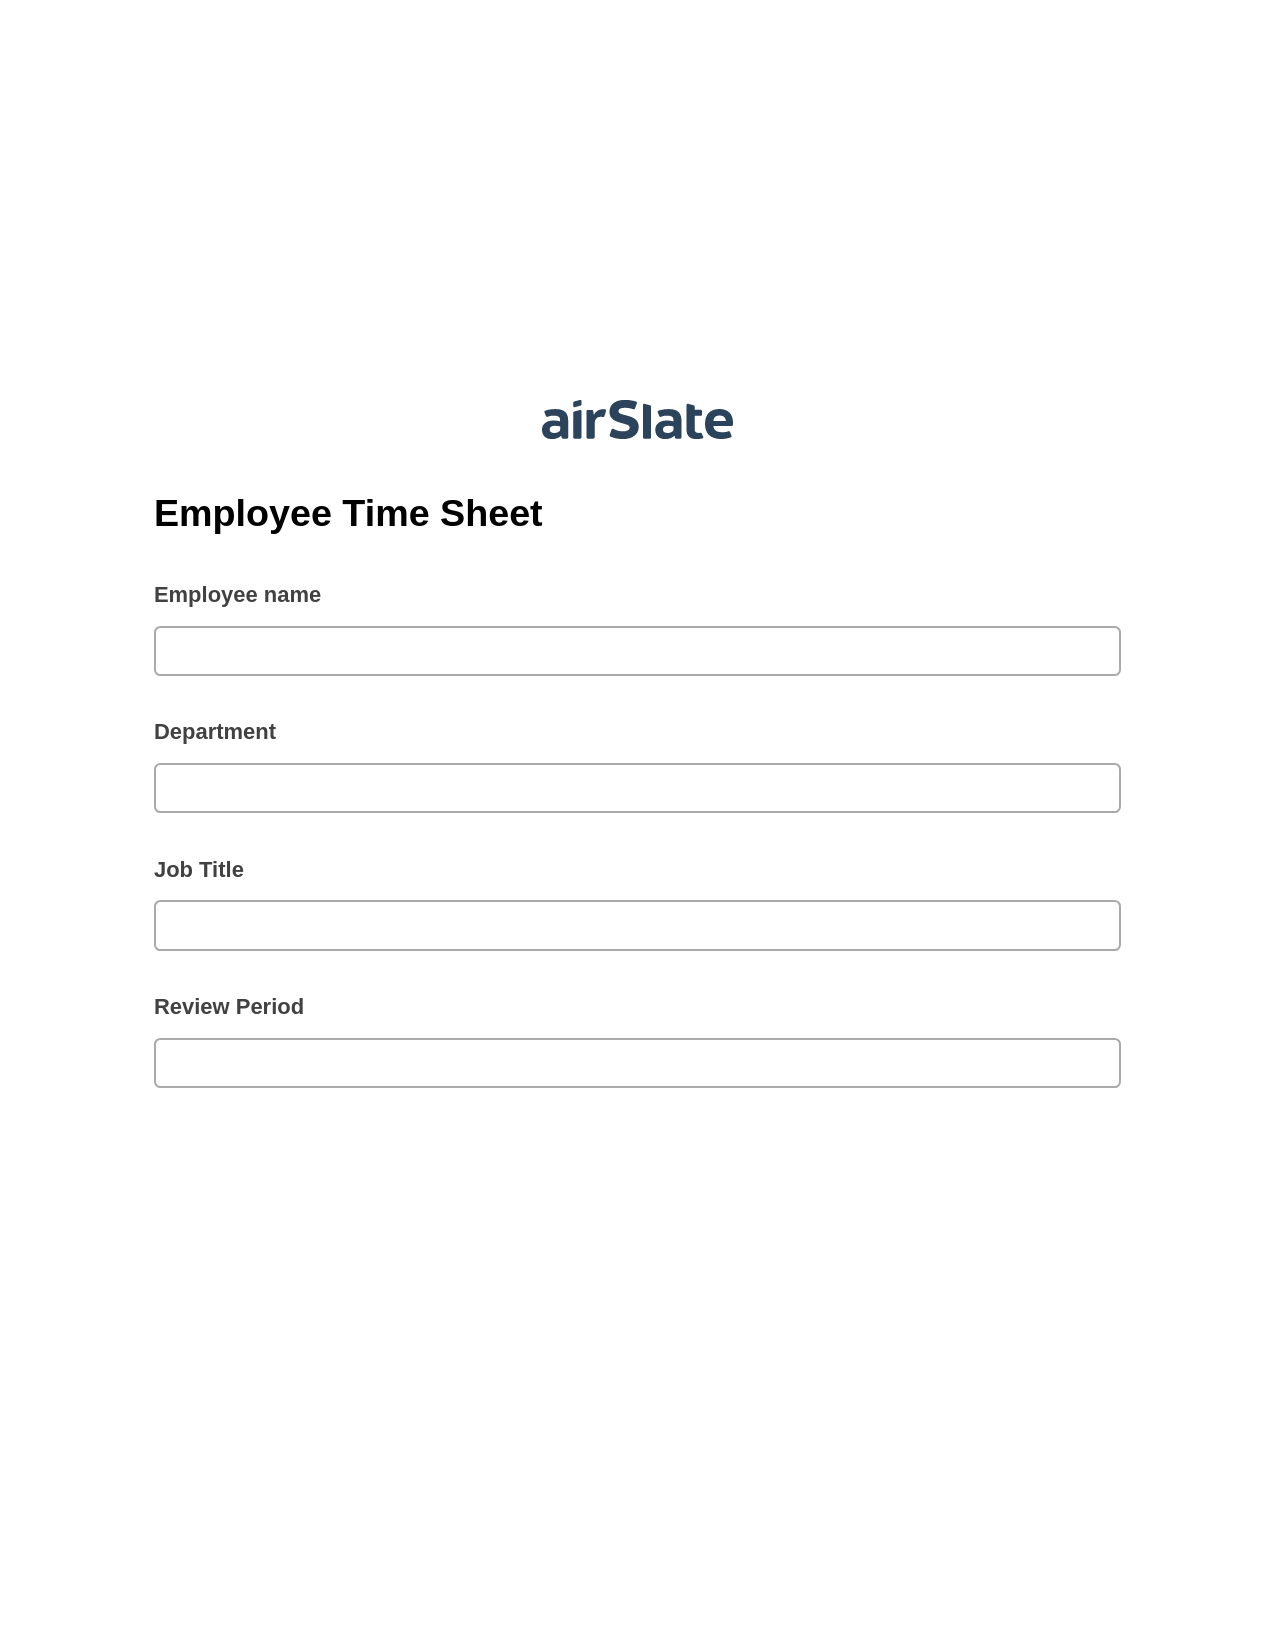 Multirole Employee Time Sheet Pre-fill from Google Sheets Bot, Create slate addon, Archive to OneDrive Bot